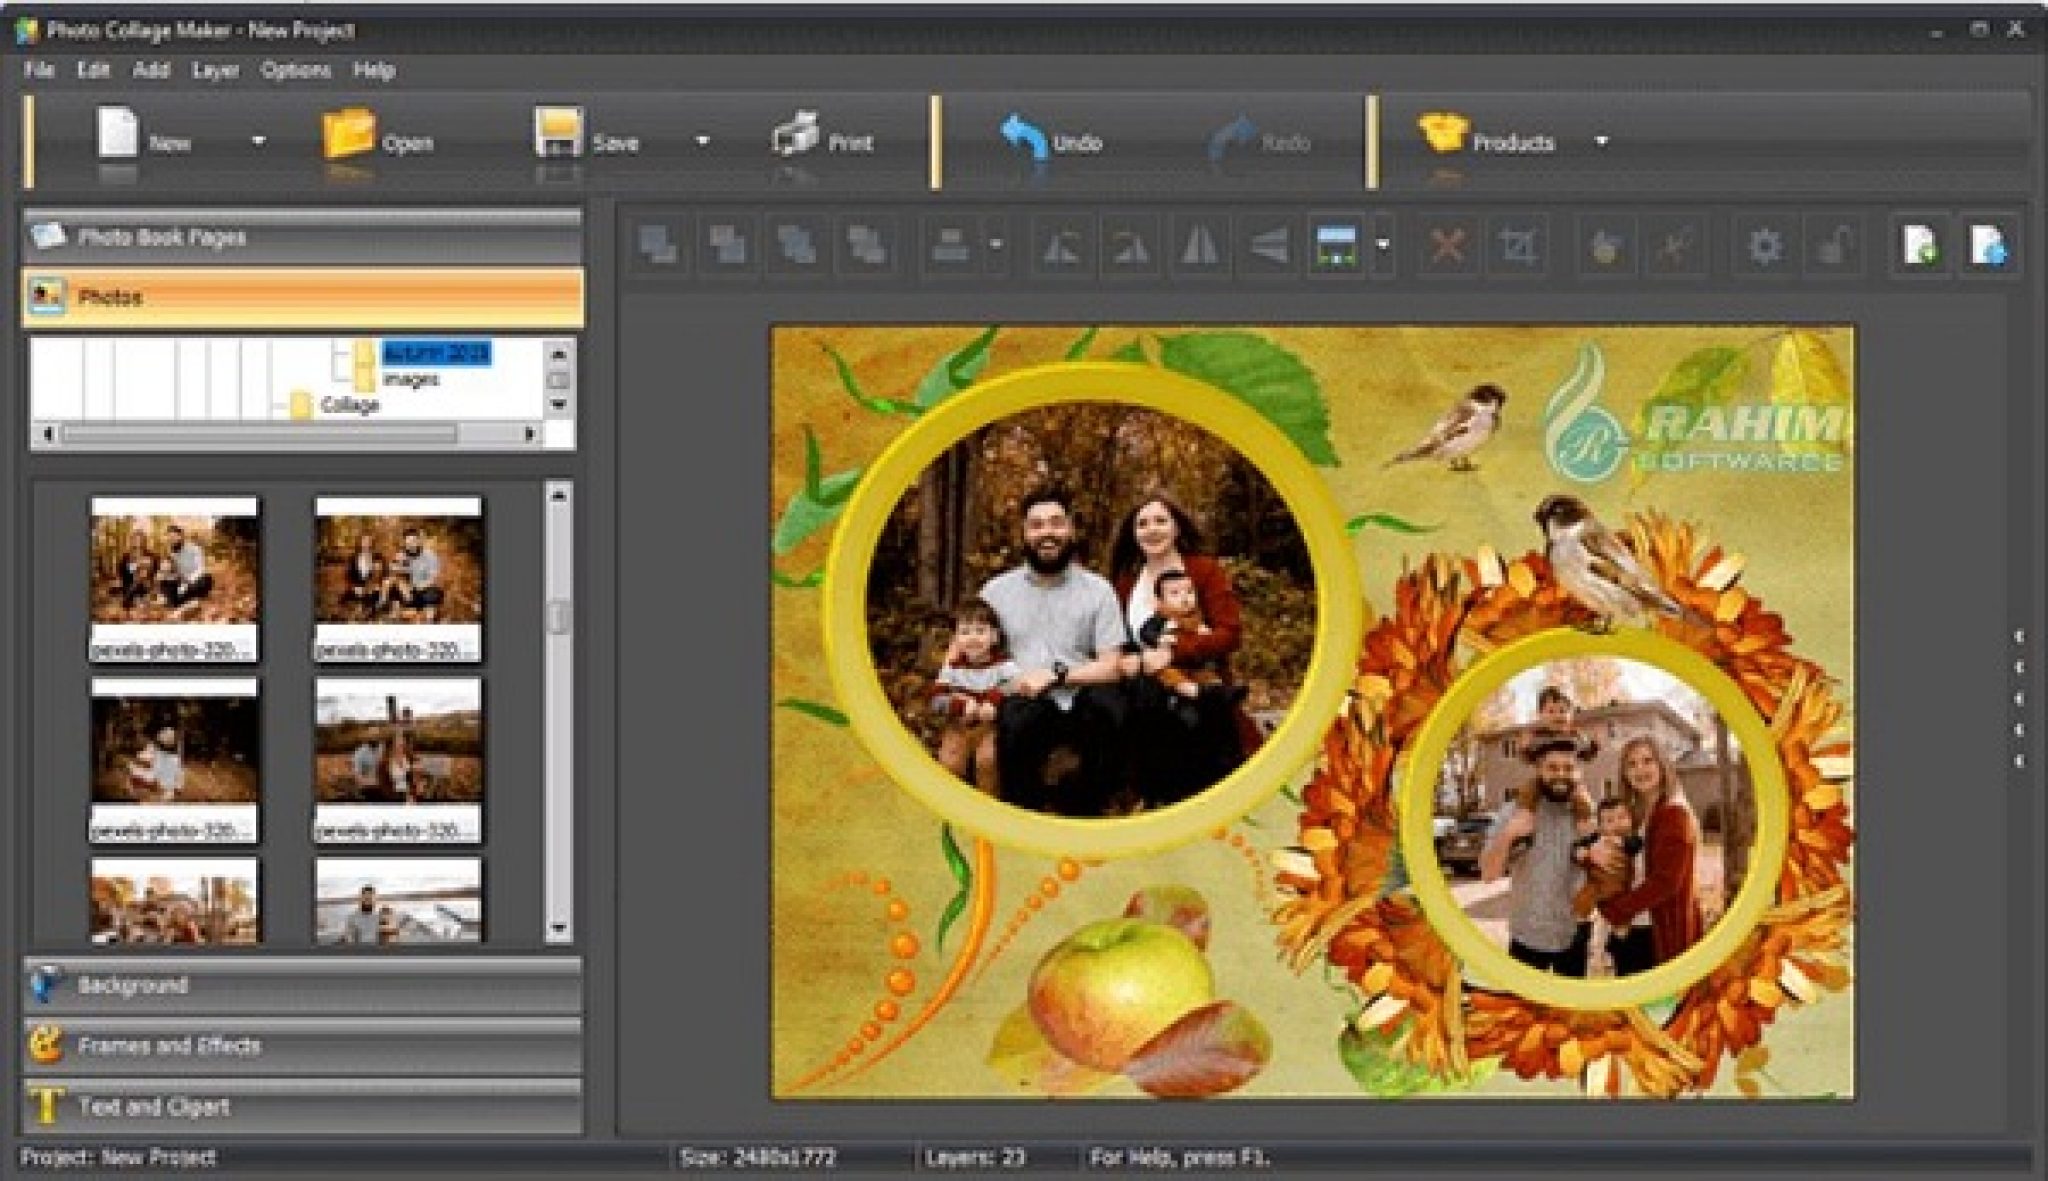 picture collage maker pro 4.0.0